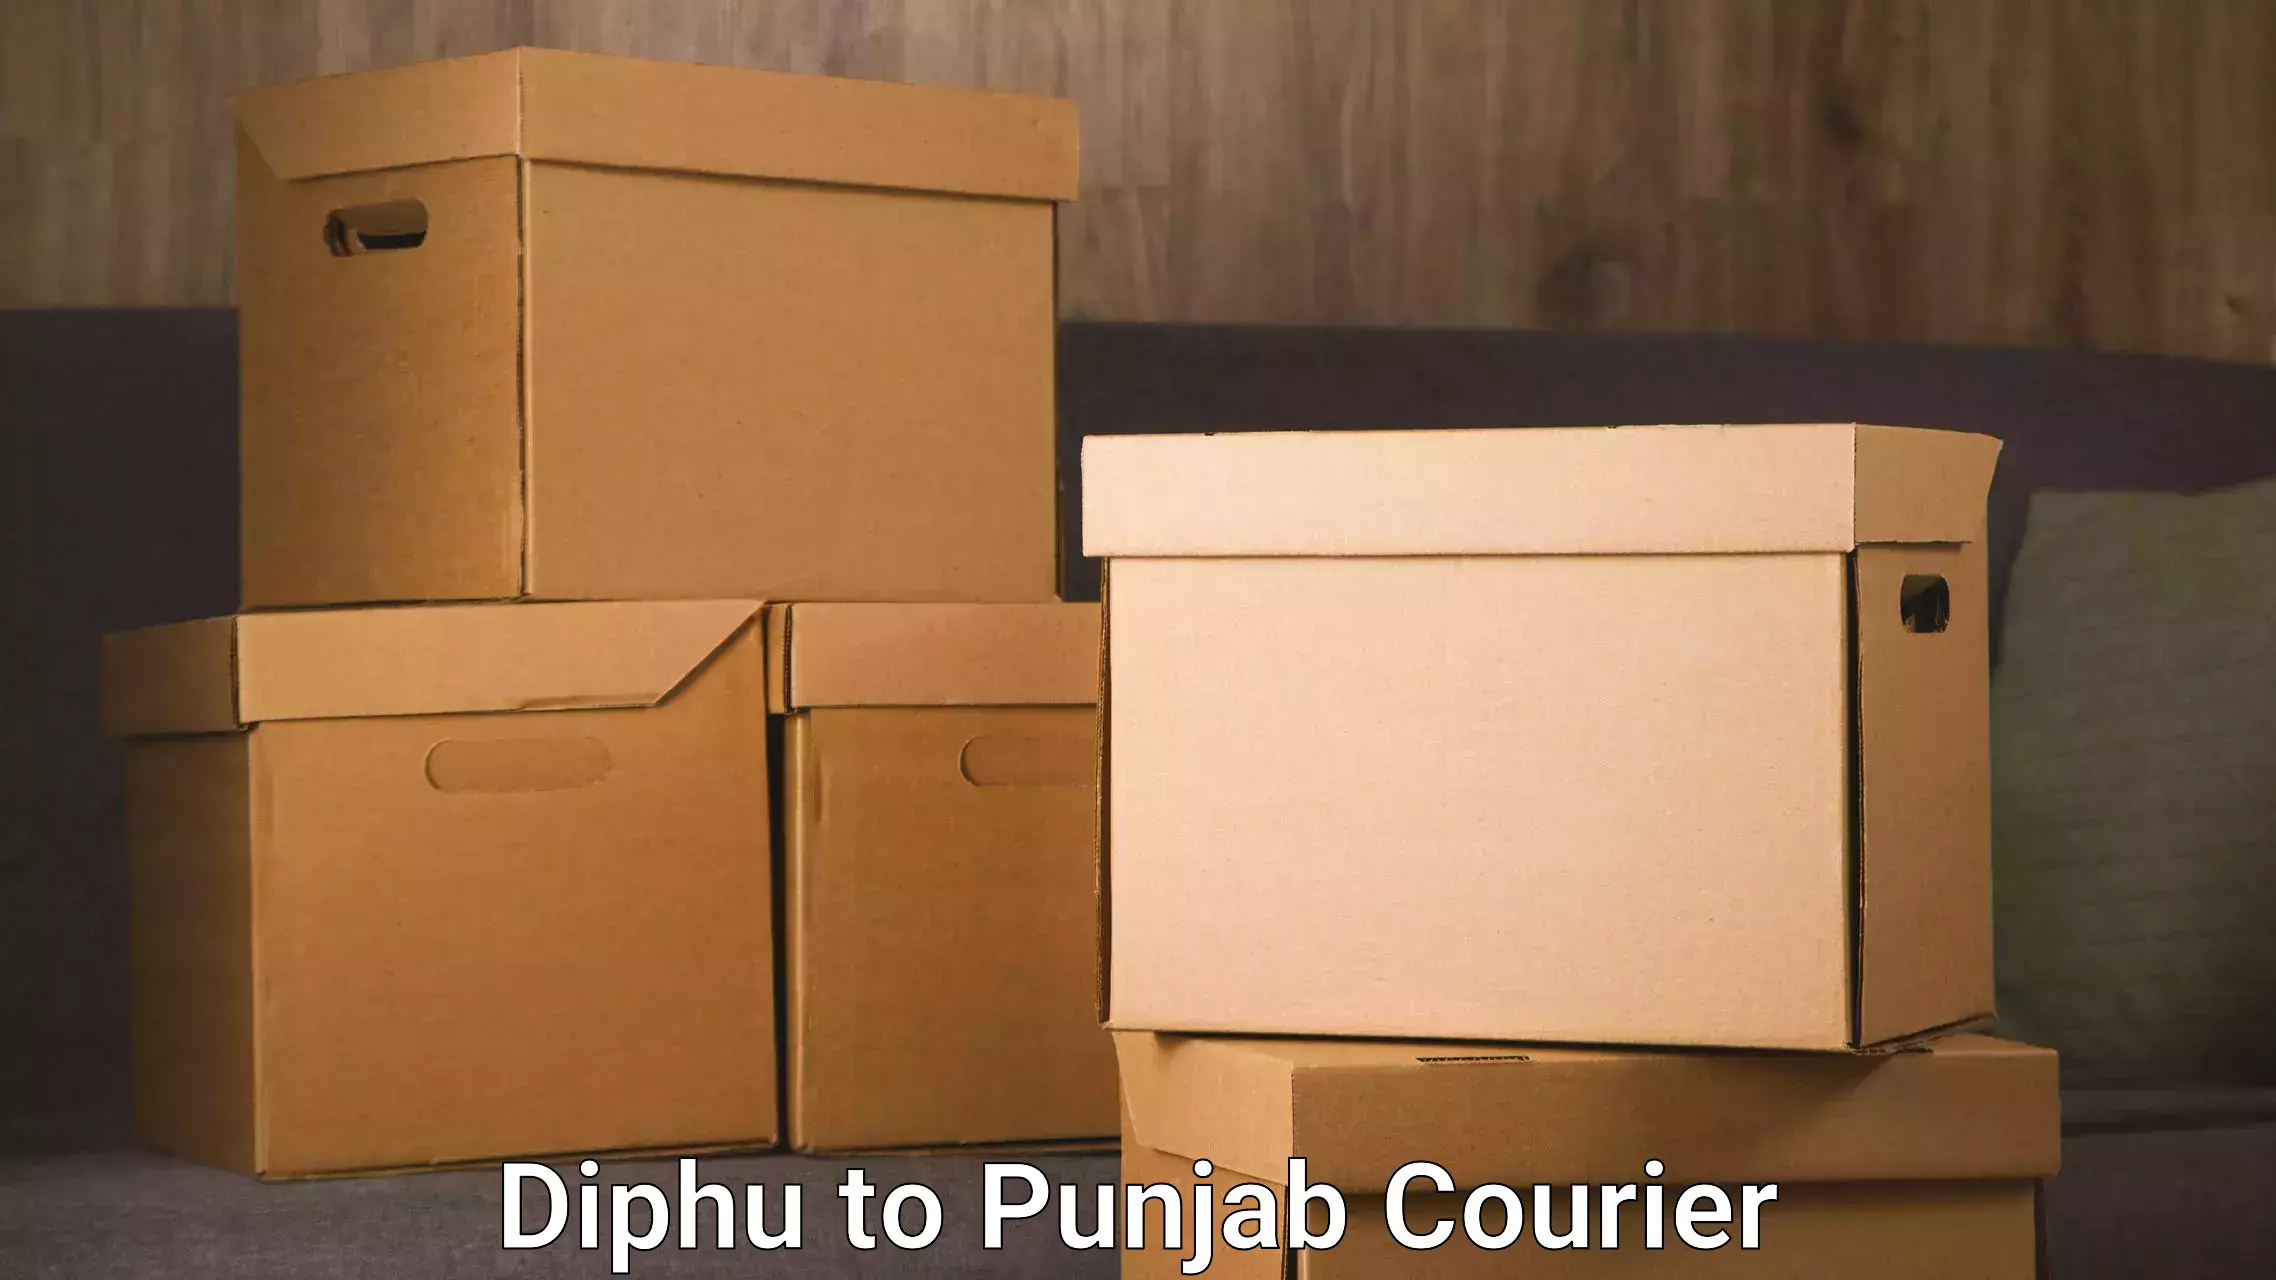 Reliable courier service Diphu to Punjab